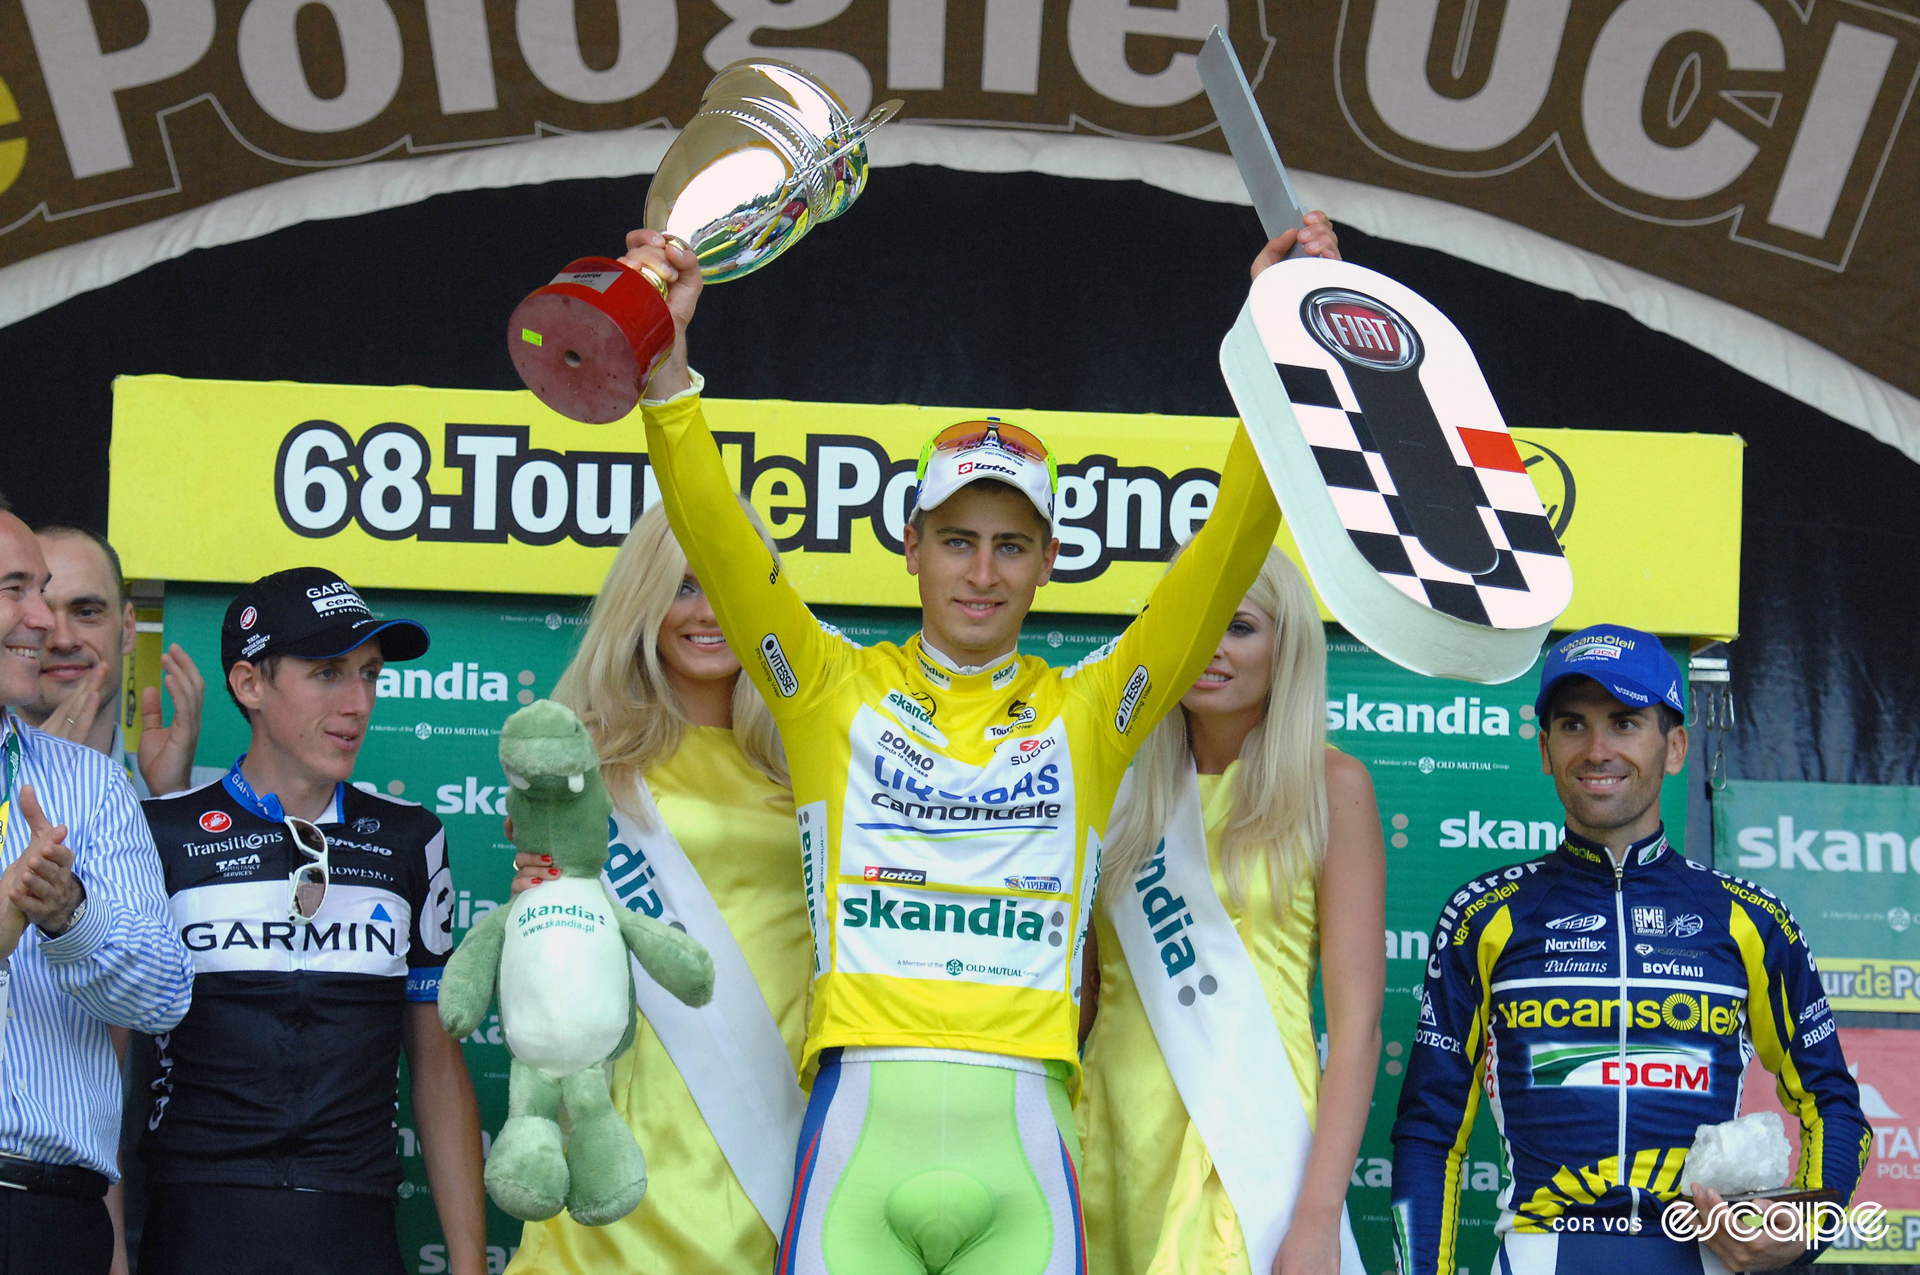 Peter Sagan stands on the podium at the Tour of Poland, holding a trophy and a strange, guitar-like object aloft.